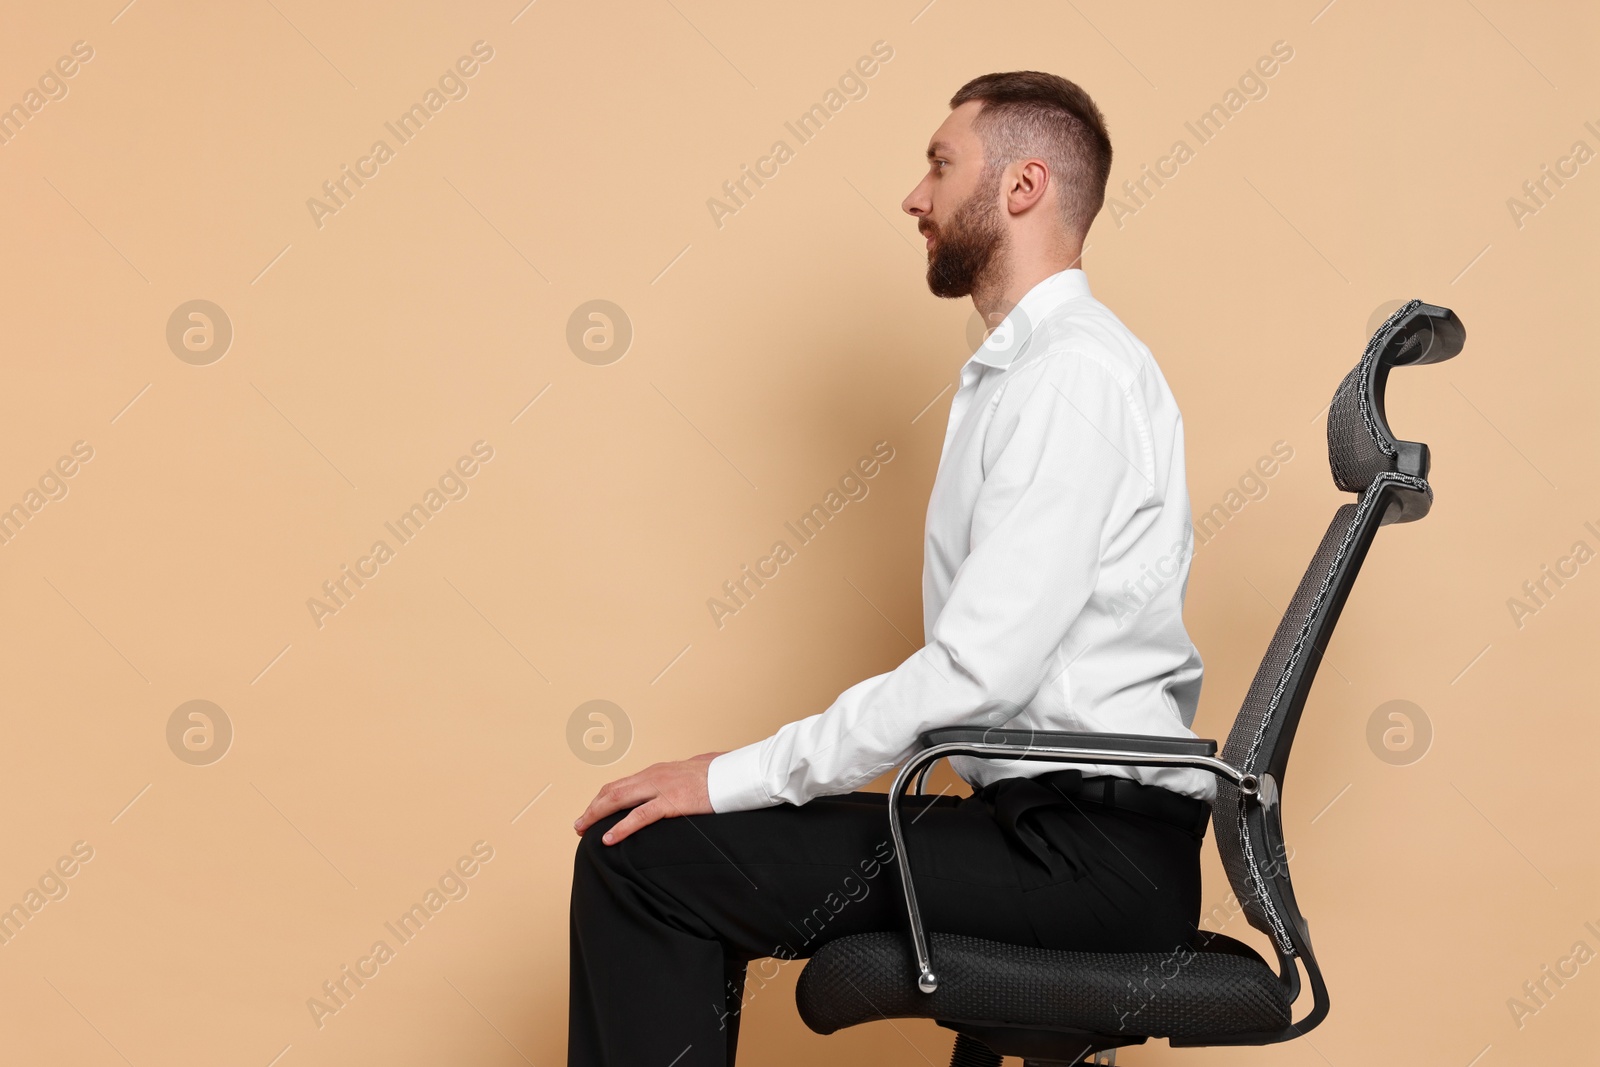 Photo of Man with good posture sitting on chair against pale orange background, space for text